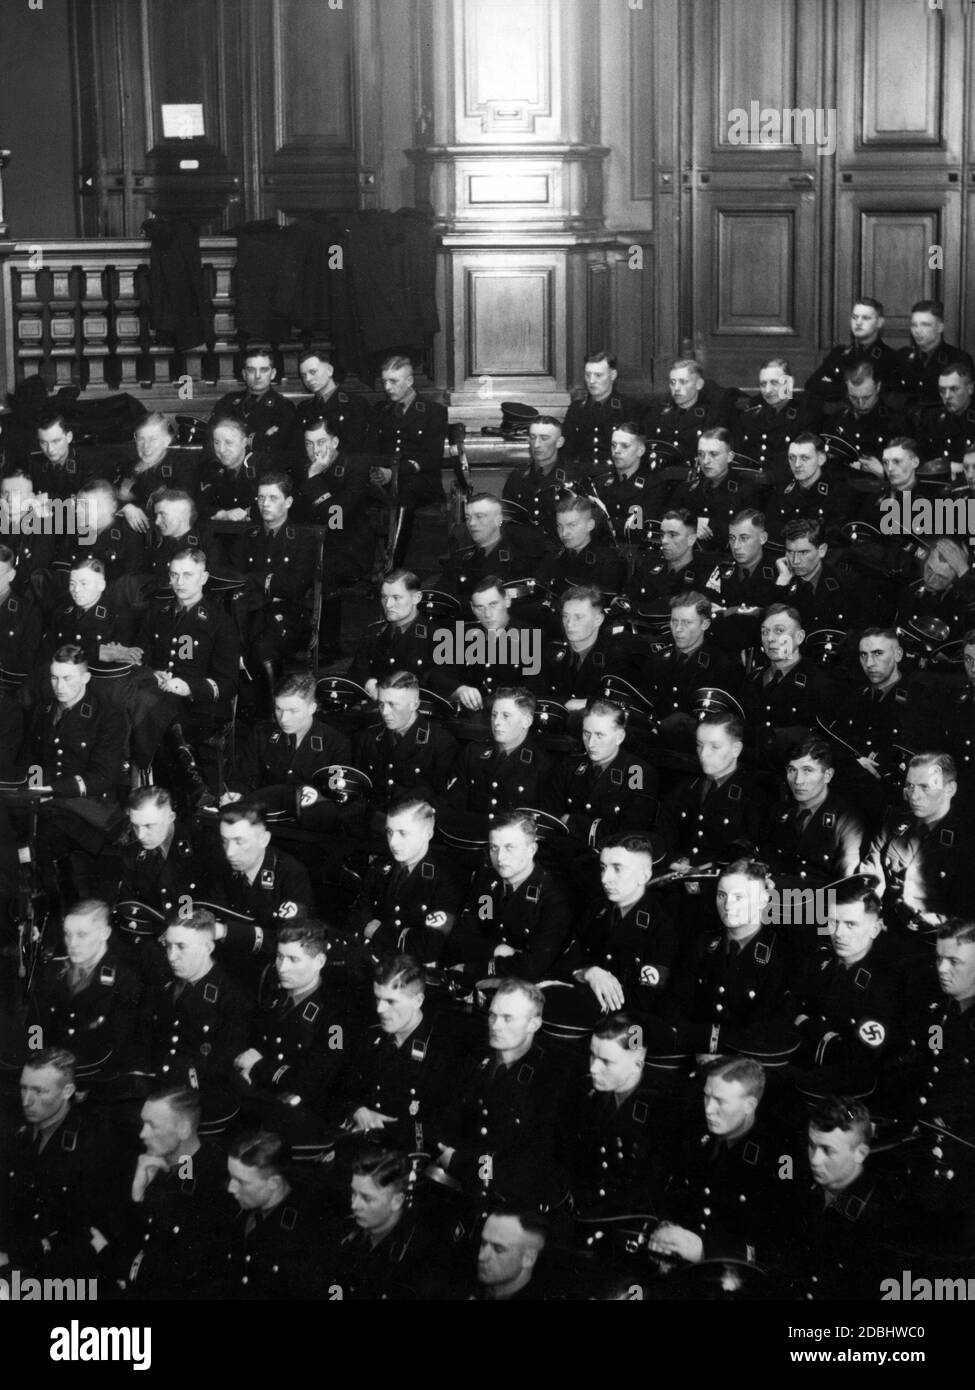 Members of the Leibstandarte Adolf-Hitler during a lecture in the lecture hall of the Staatliches Museum fuer Voelkerkunde in the Saarlandstrasse in Berlin. Stock Photo